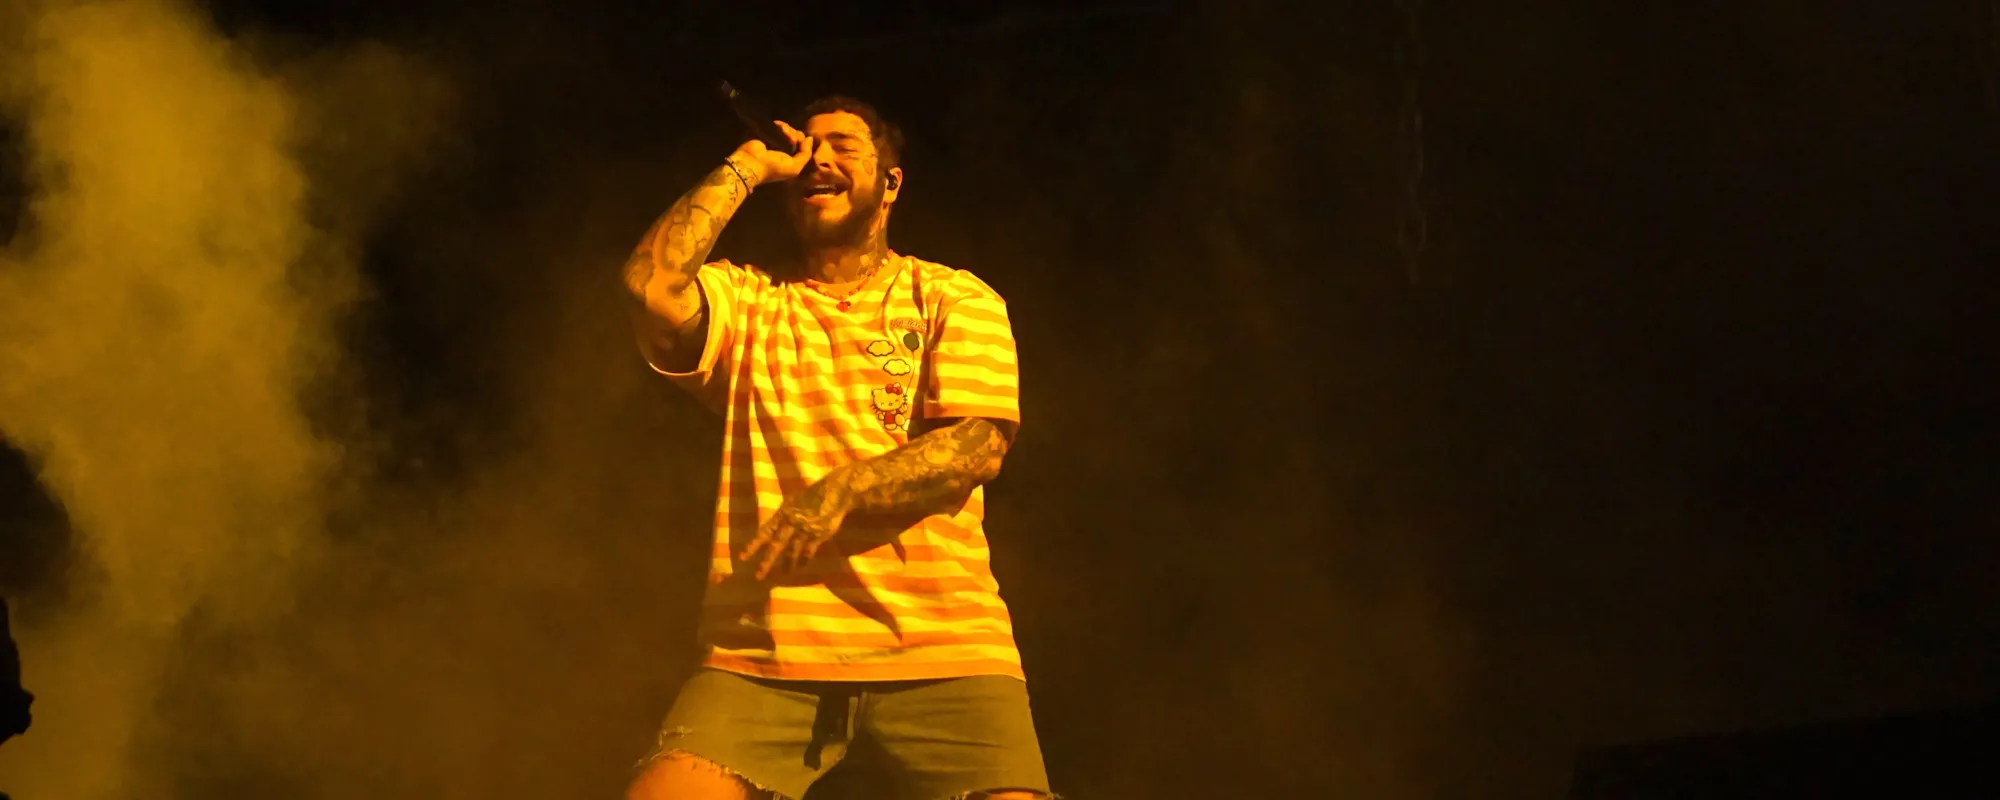 Post Malone is Ready to Record a Country Album: “There’s Nothing Stopping Me”